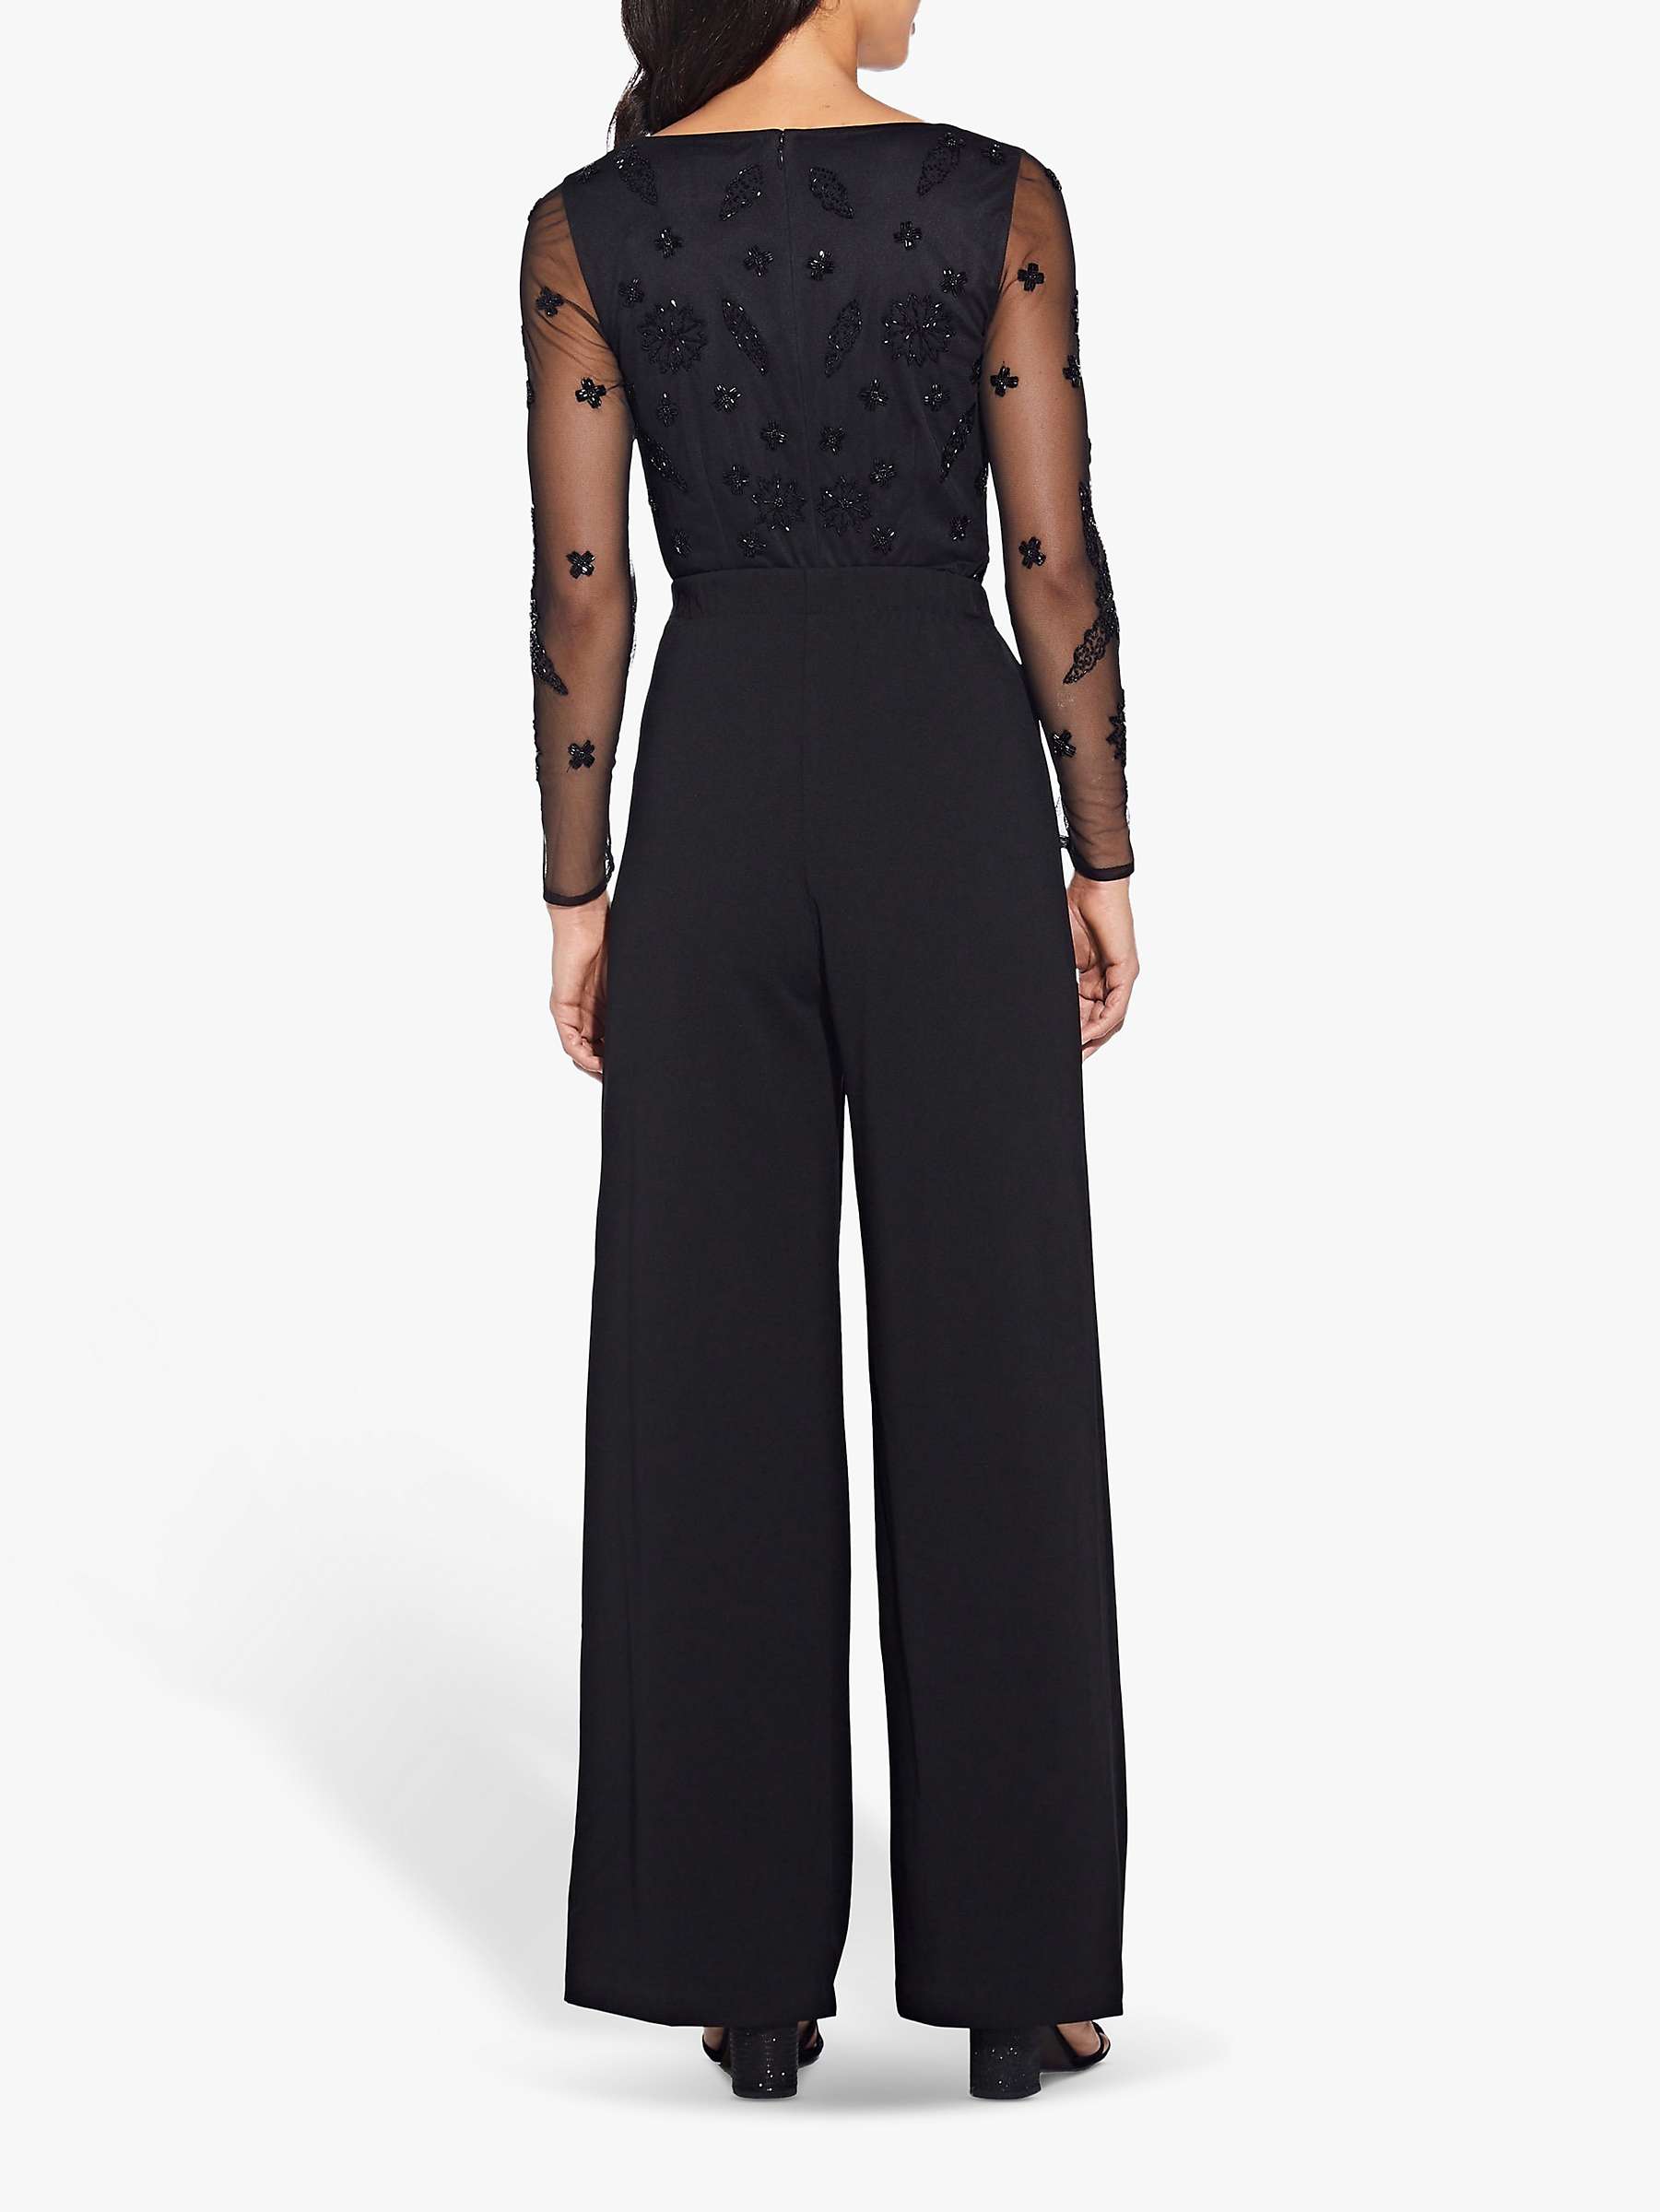 Buy Adrianna Papell Crepe Trousers, Black Online at johnlewis.com